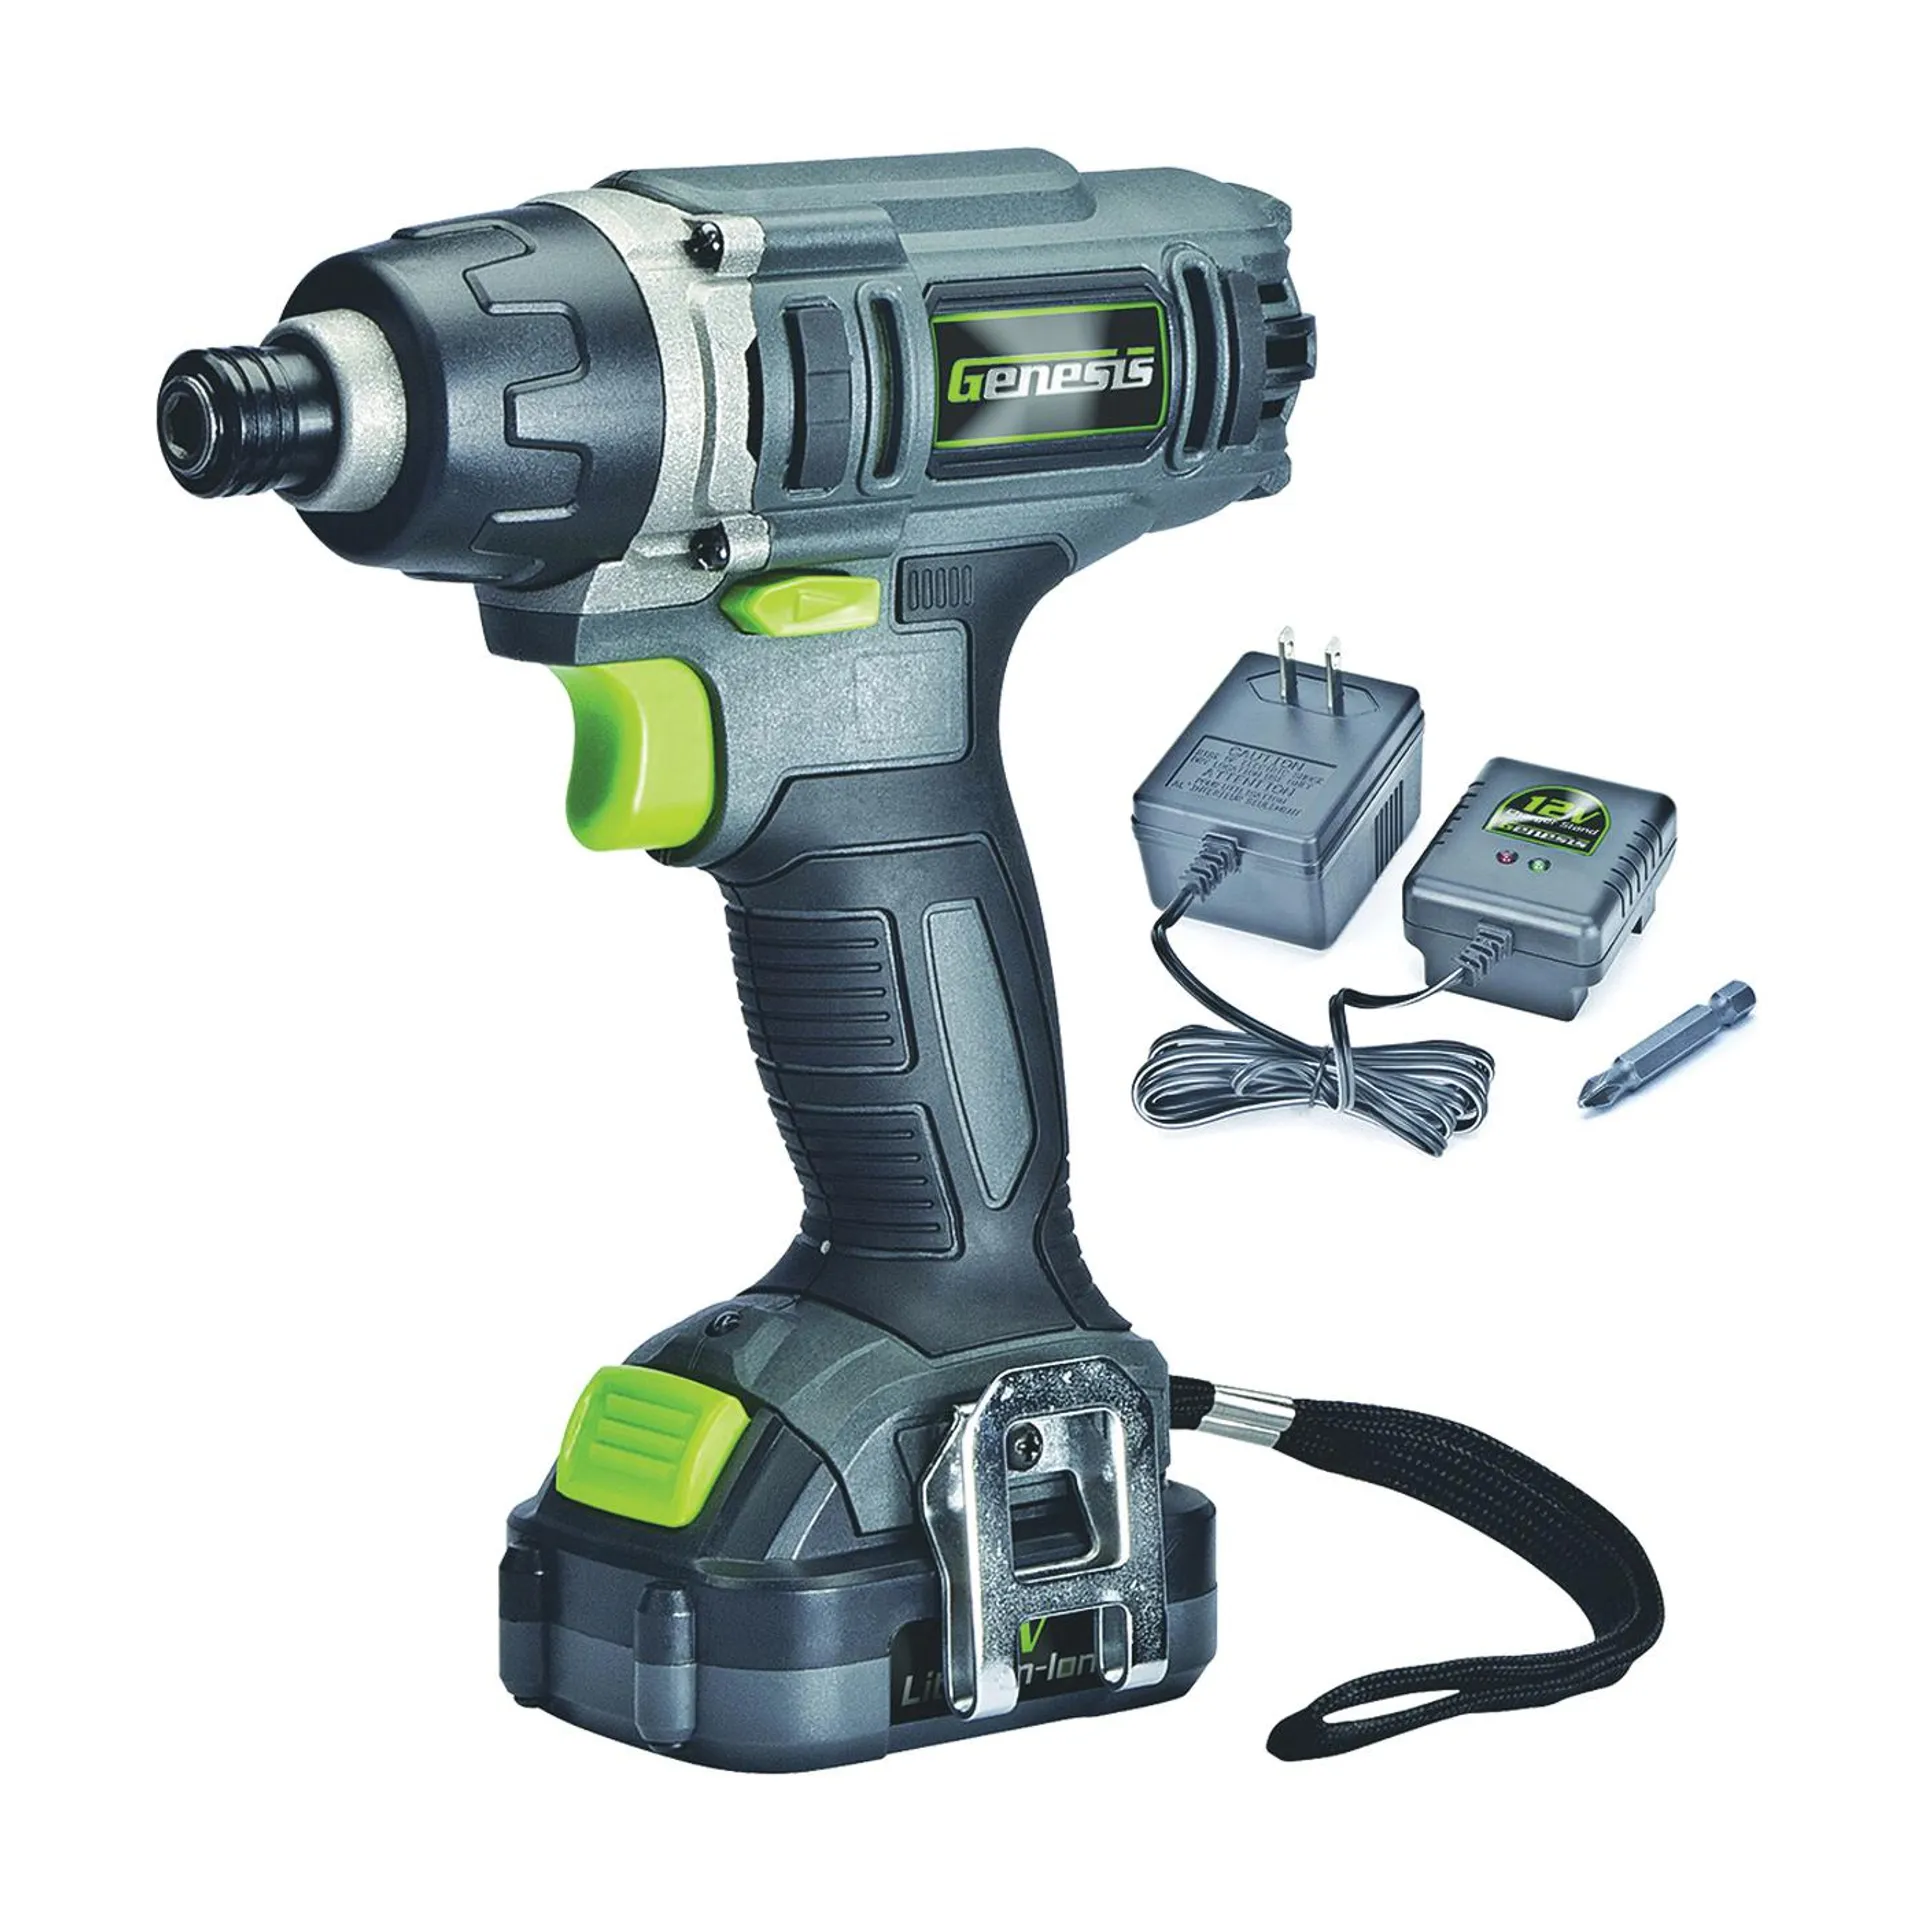 GLID12B Impact Driver, Battery Included, 12 V, 1/4 in Drive, Hex Drive, 3000 ipm, 2300 rpm Speed